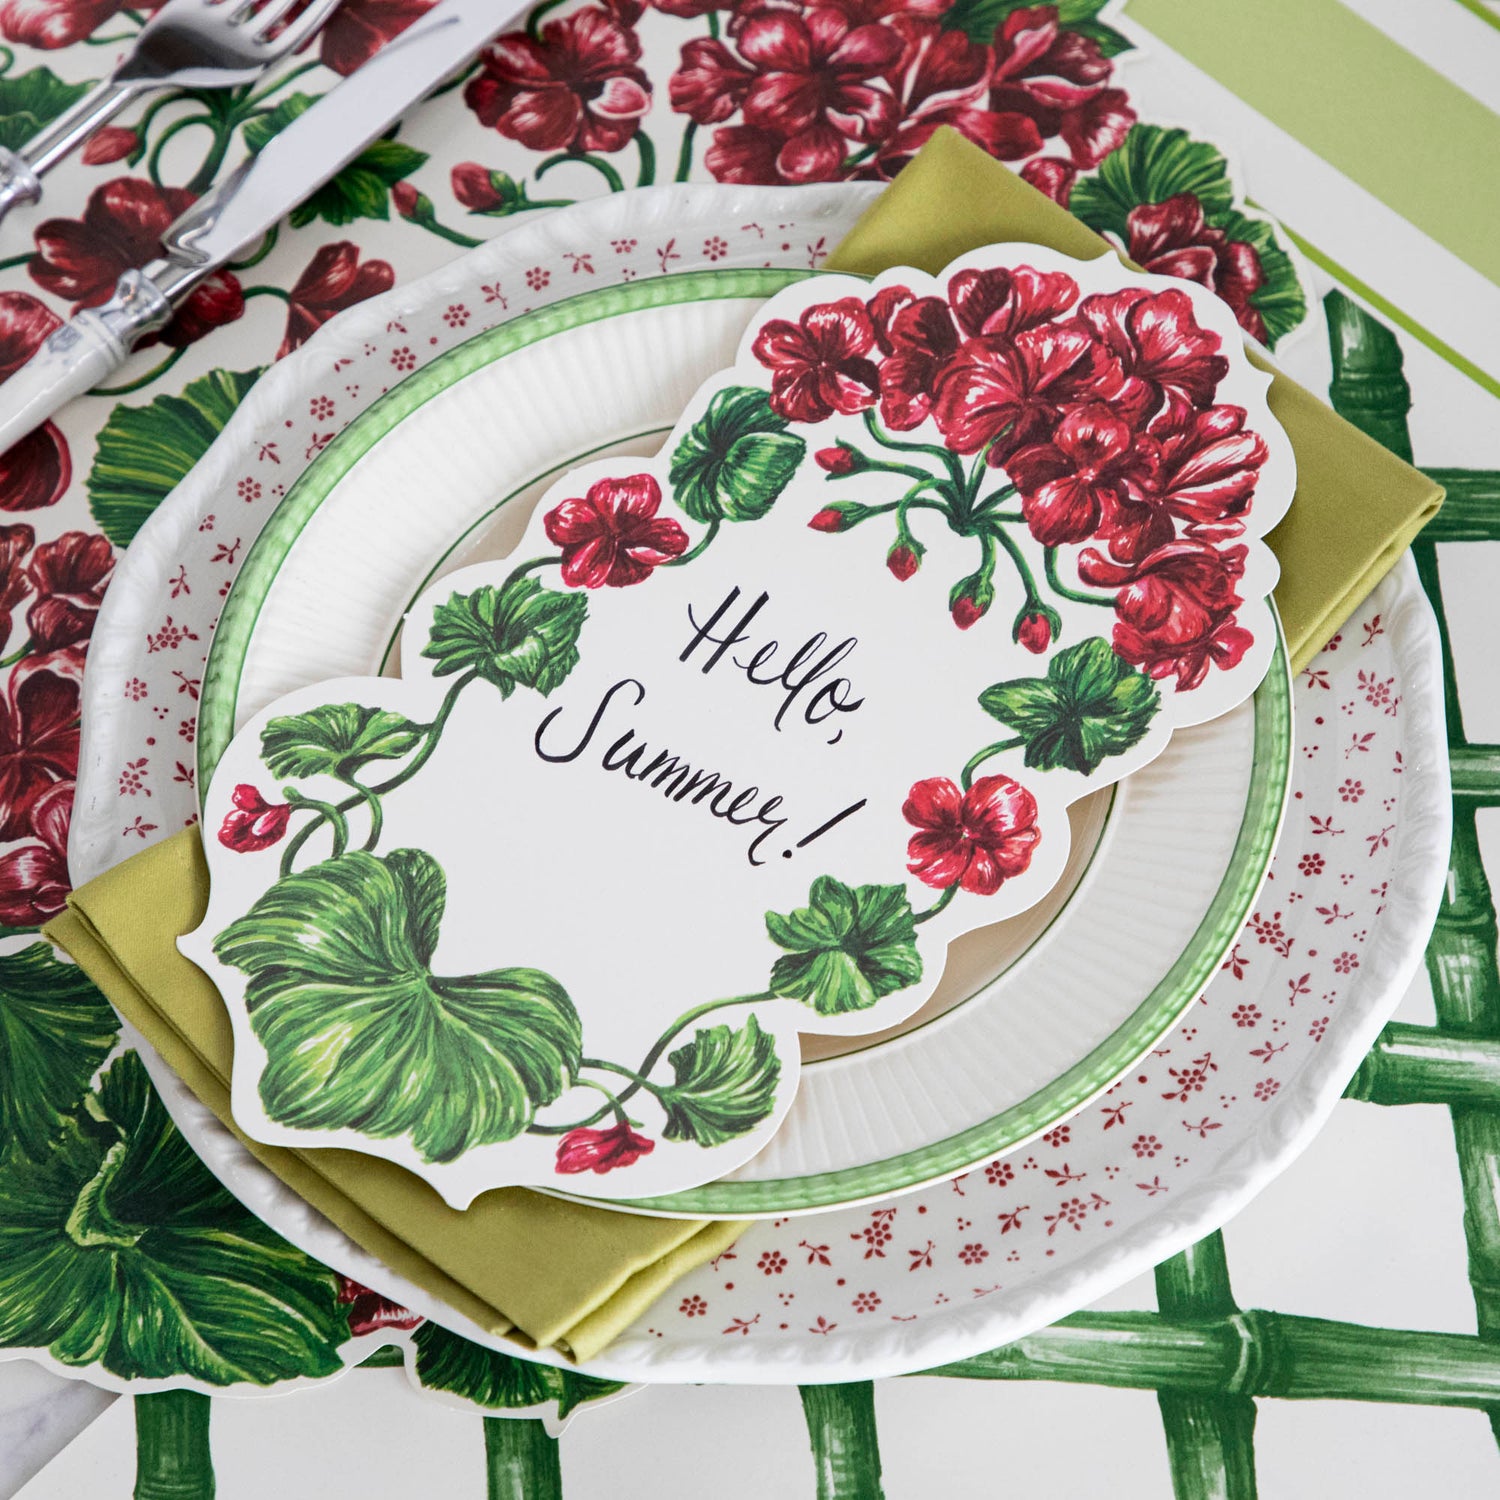 A Geranium Table Accent with &quot;Hello Summer!&quot; written on it resting on the plate of an elegant place setting.